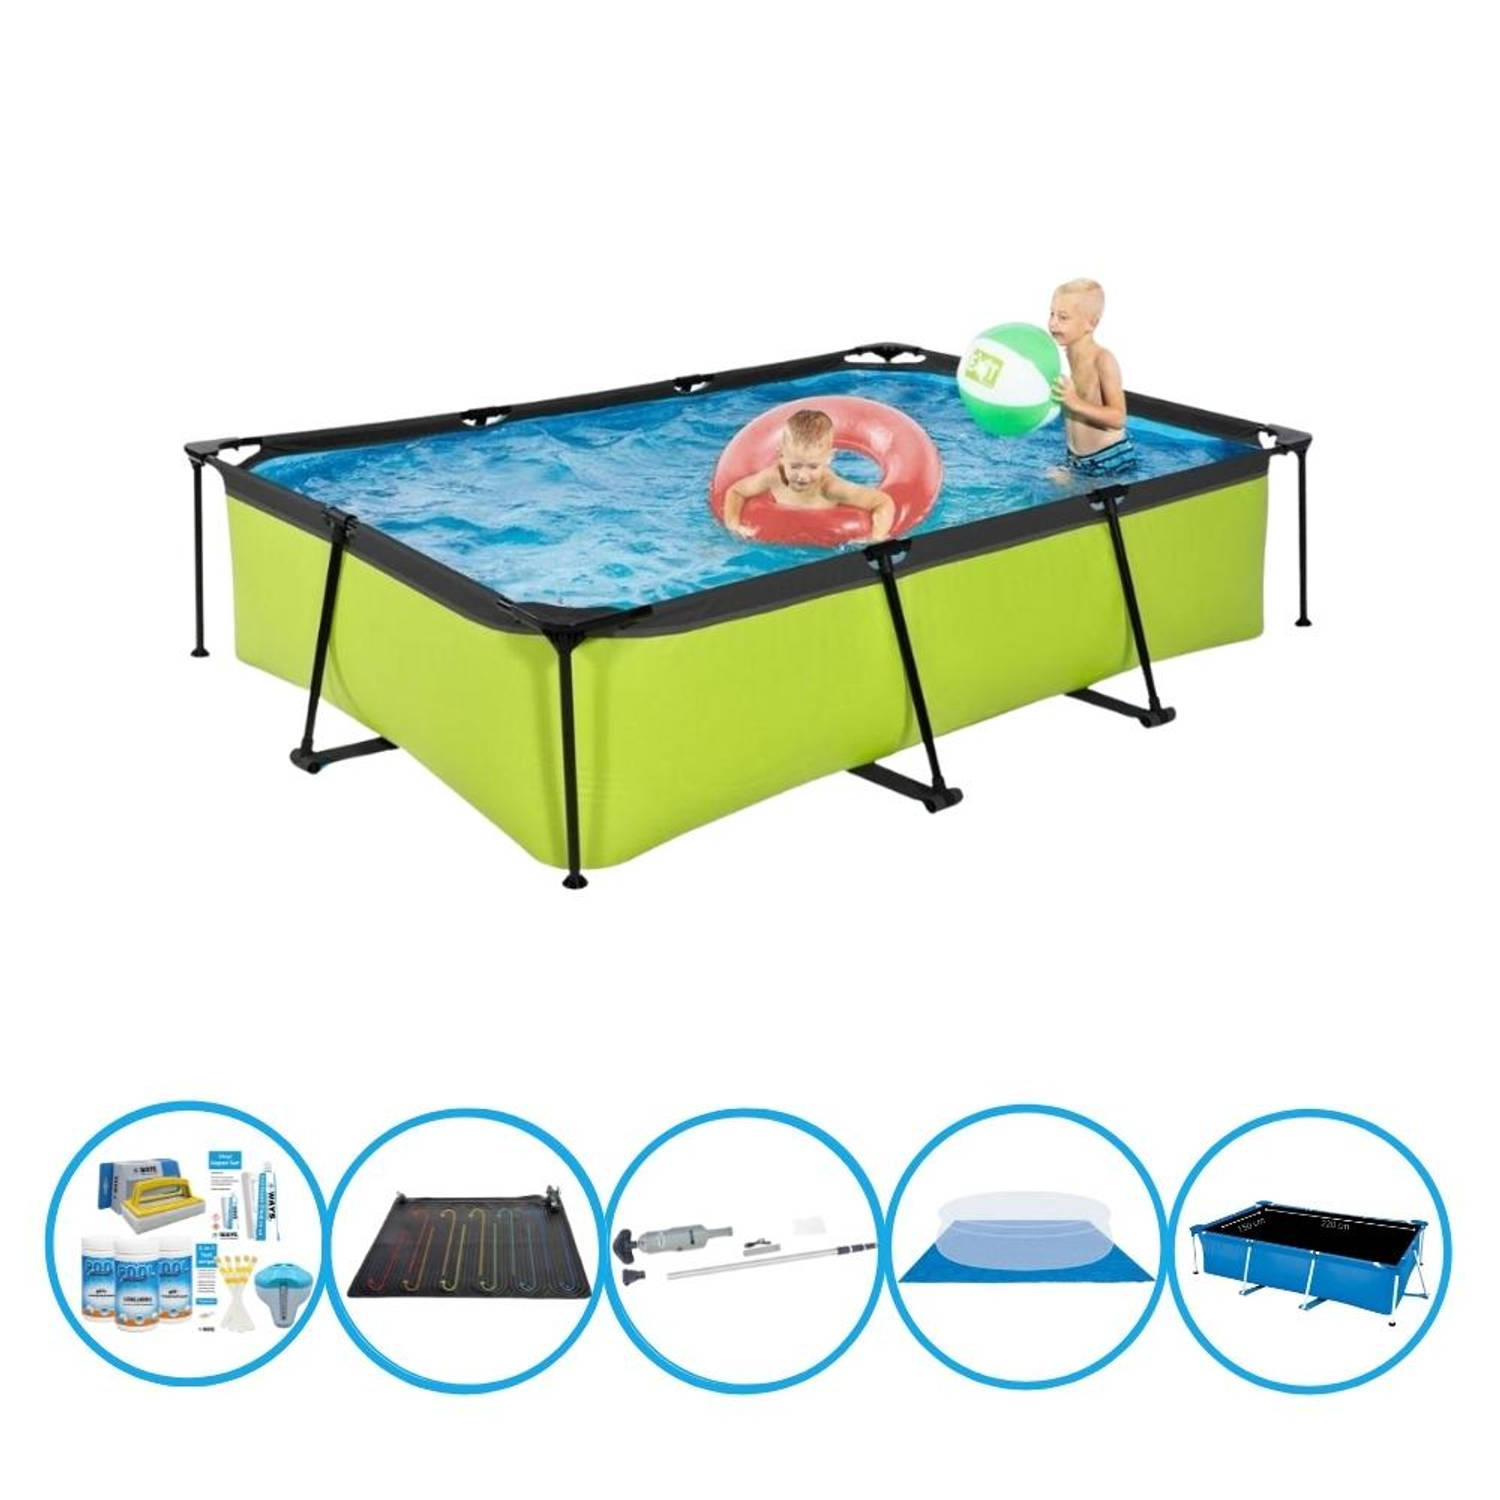 EXIT Toys Exit Zwembad Lime - Frame Pool 300x200x65 Cm - Zwembad Combi Deal - Groen